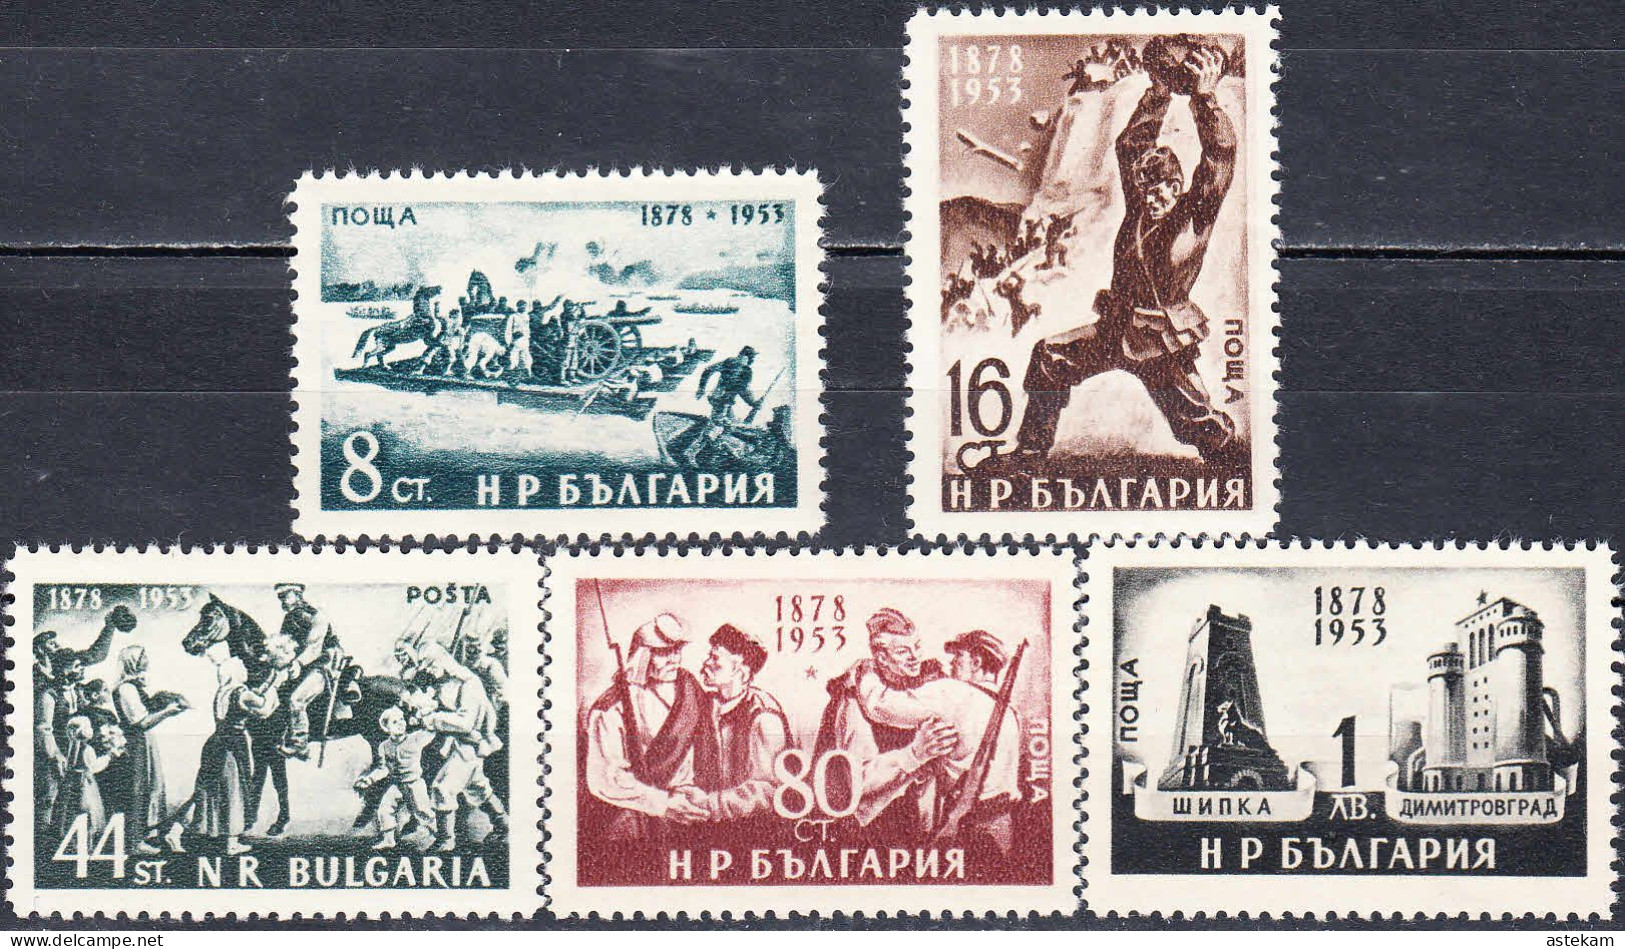 BULGARIA 1953, 75 YEARS Since LIBERATION Of TURKISH SLAVERY, COMPLETE, MNH SERIES With GOOD QUALITY, *** - Unused Stamps